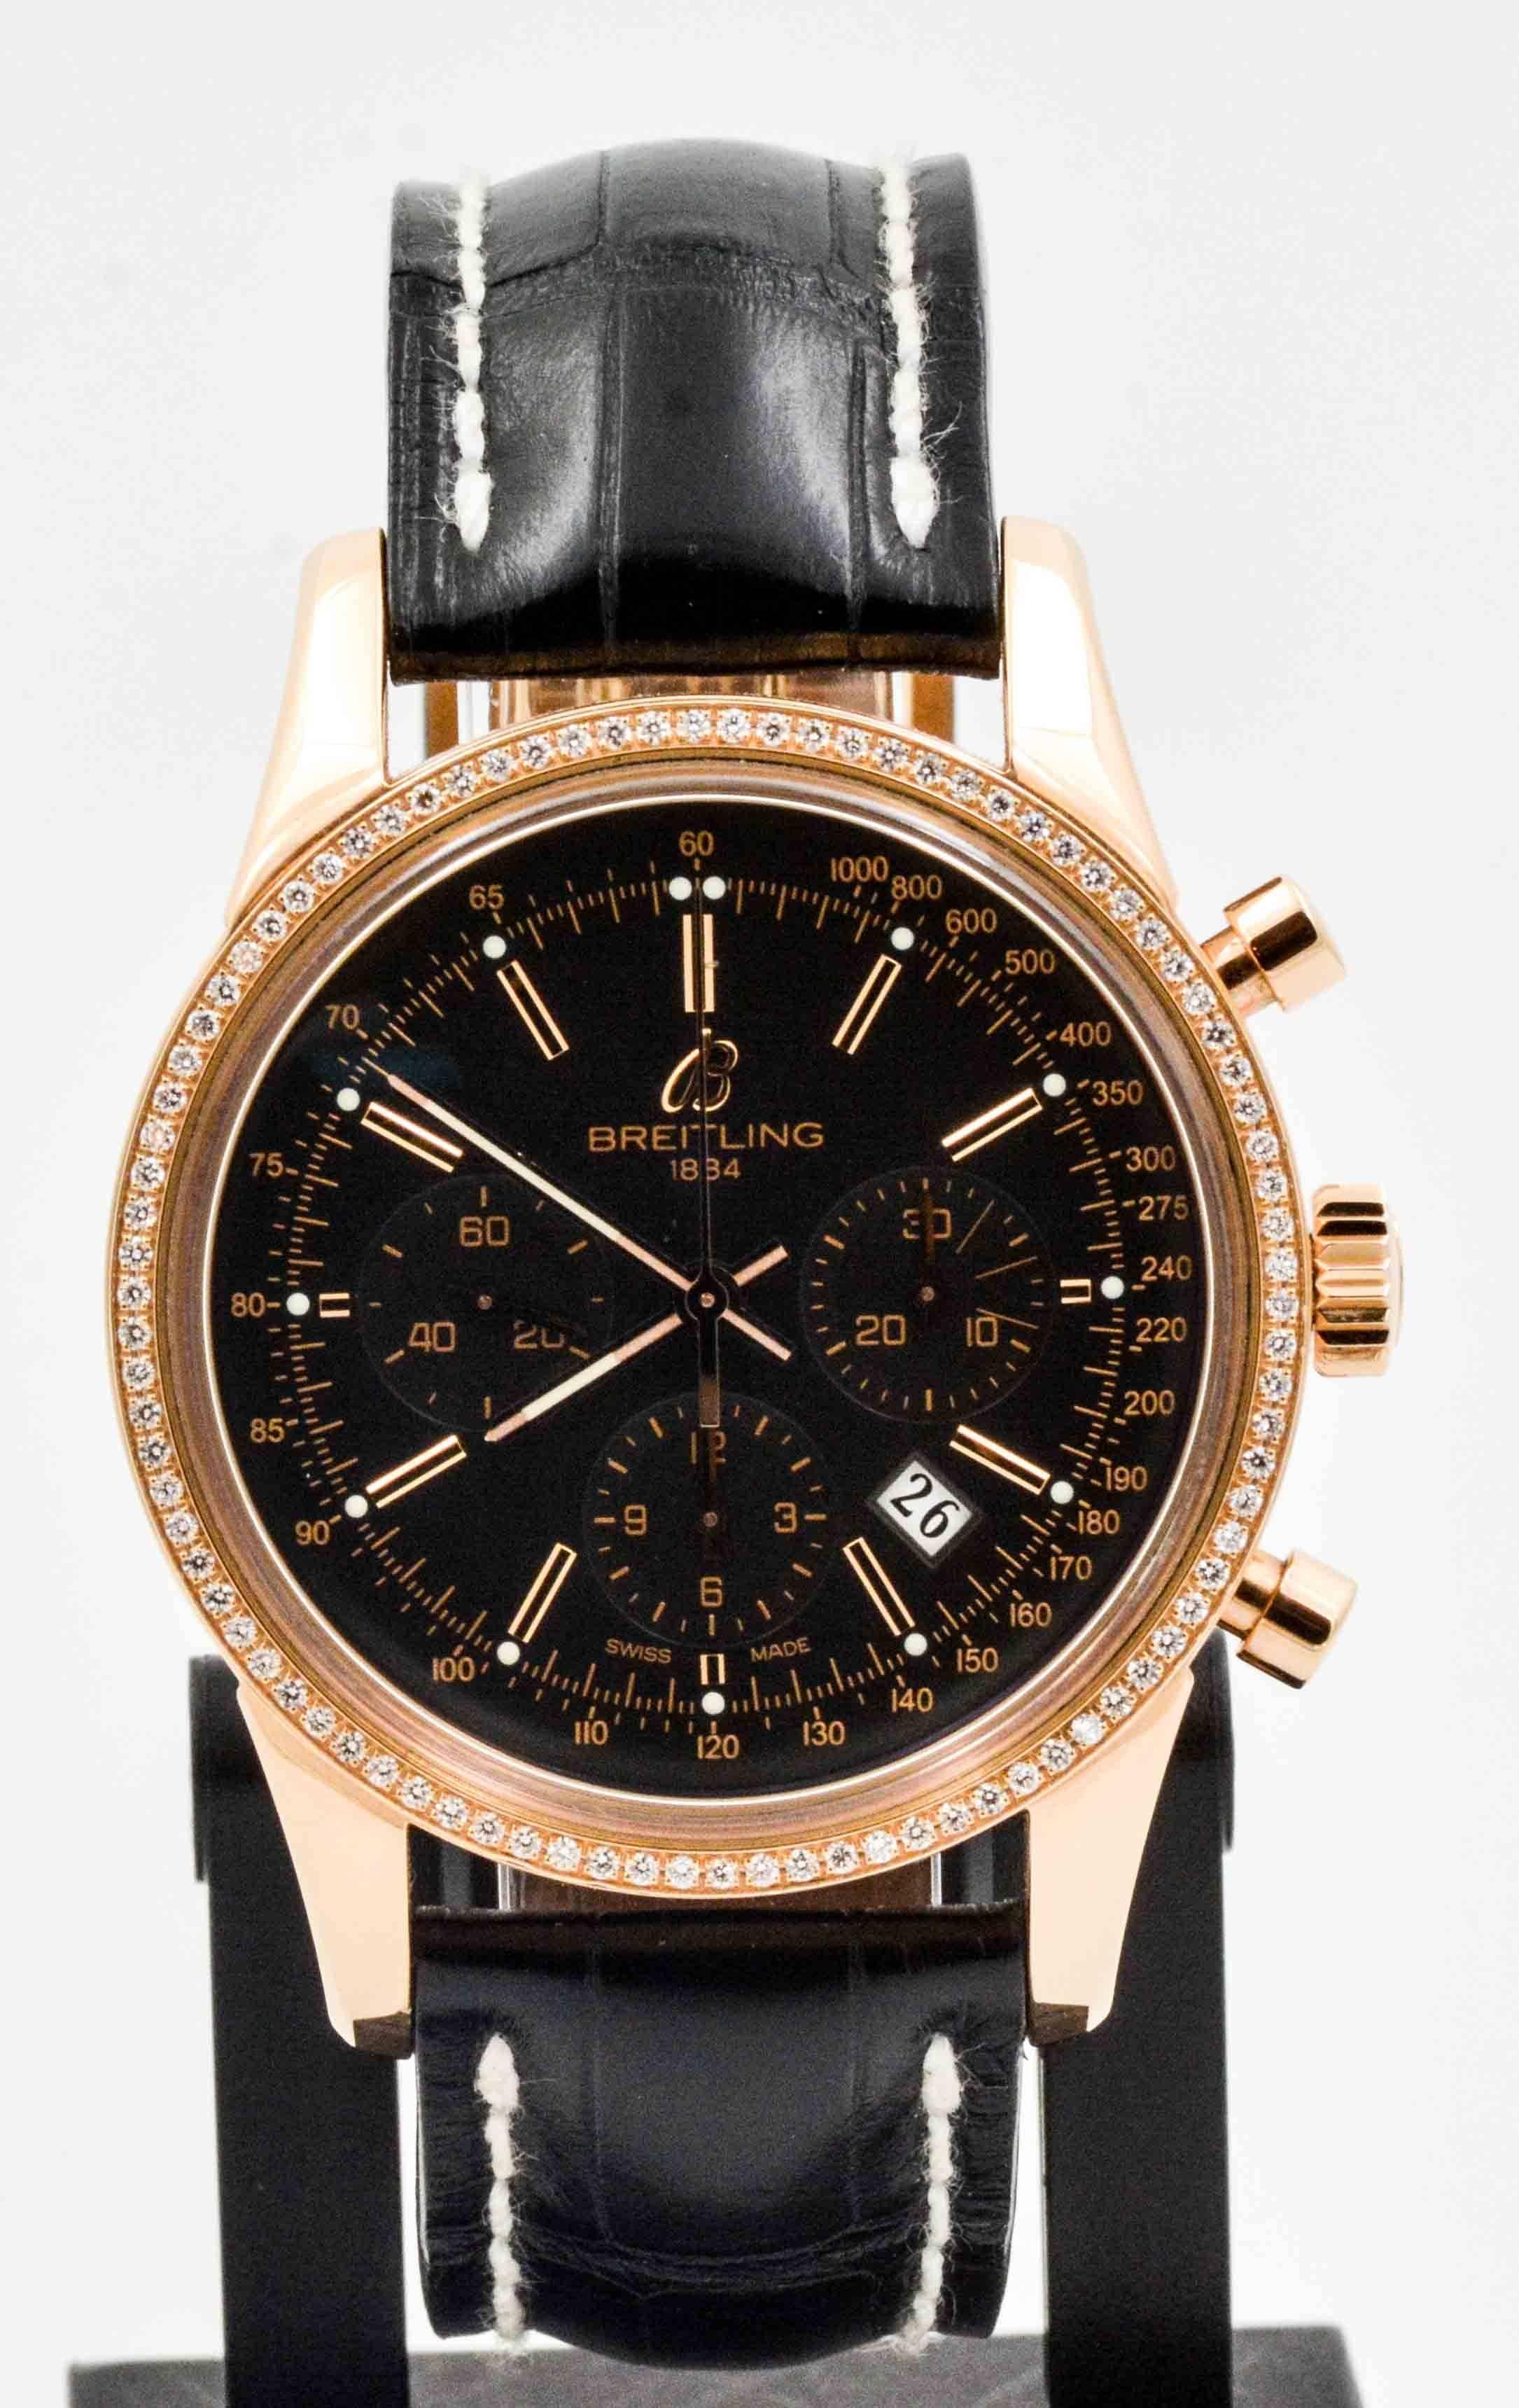 A man who wears Breitling will be confident he is well dressed. This 2014 watch, fashioned with a breathtaking 18 karat rose gold Transocean 42mm chronograph, is a certified pre-owned Breitling piece that is sure to impress. Featuring a black dial,